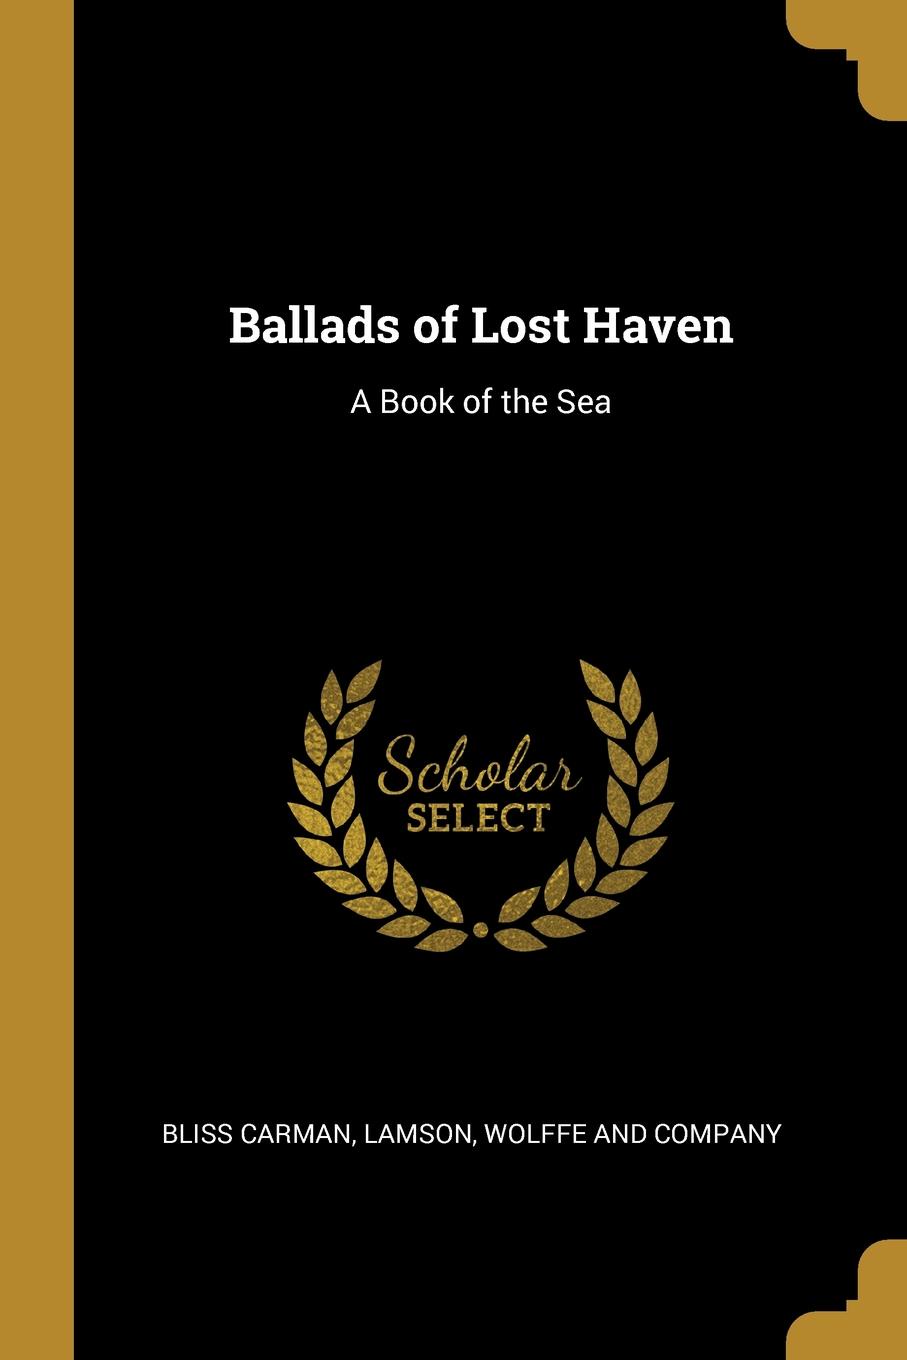 Ballads of Lost Haven. A Book of the Sea